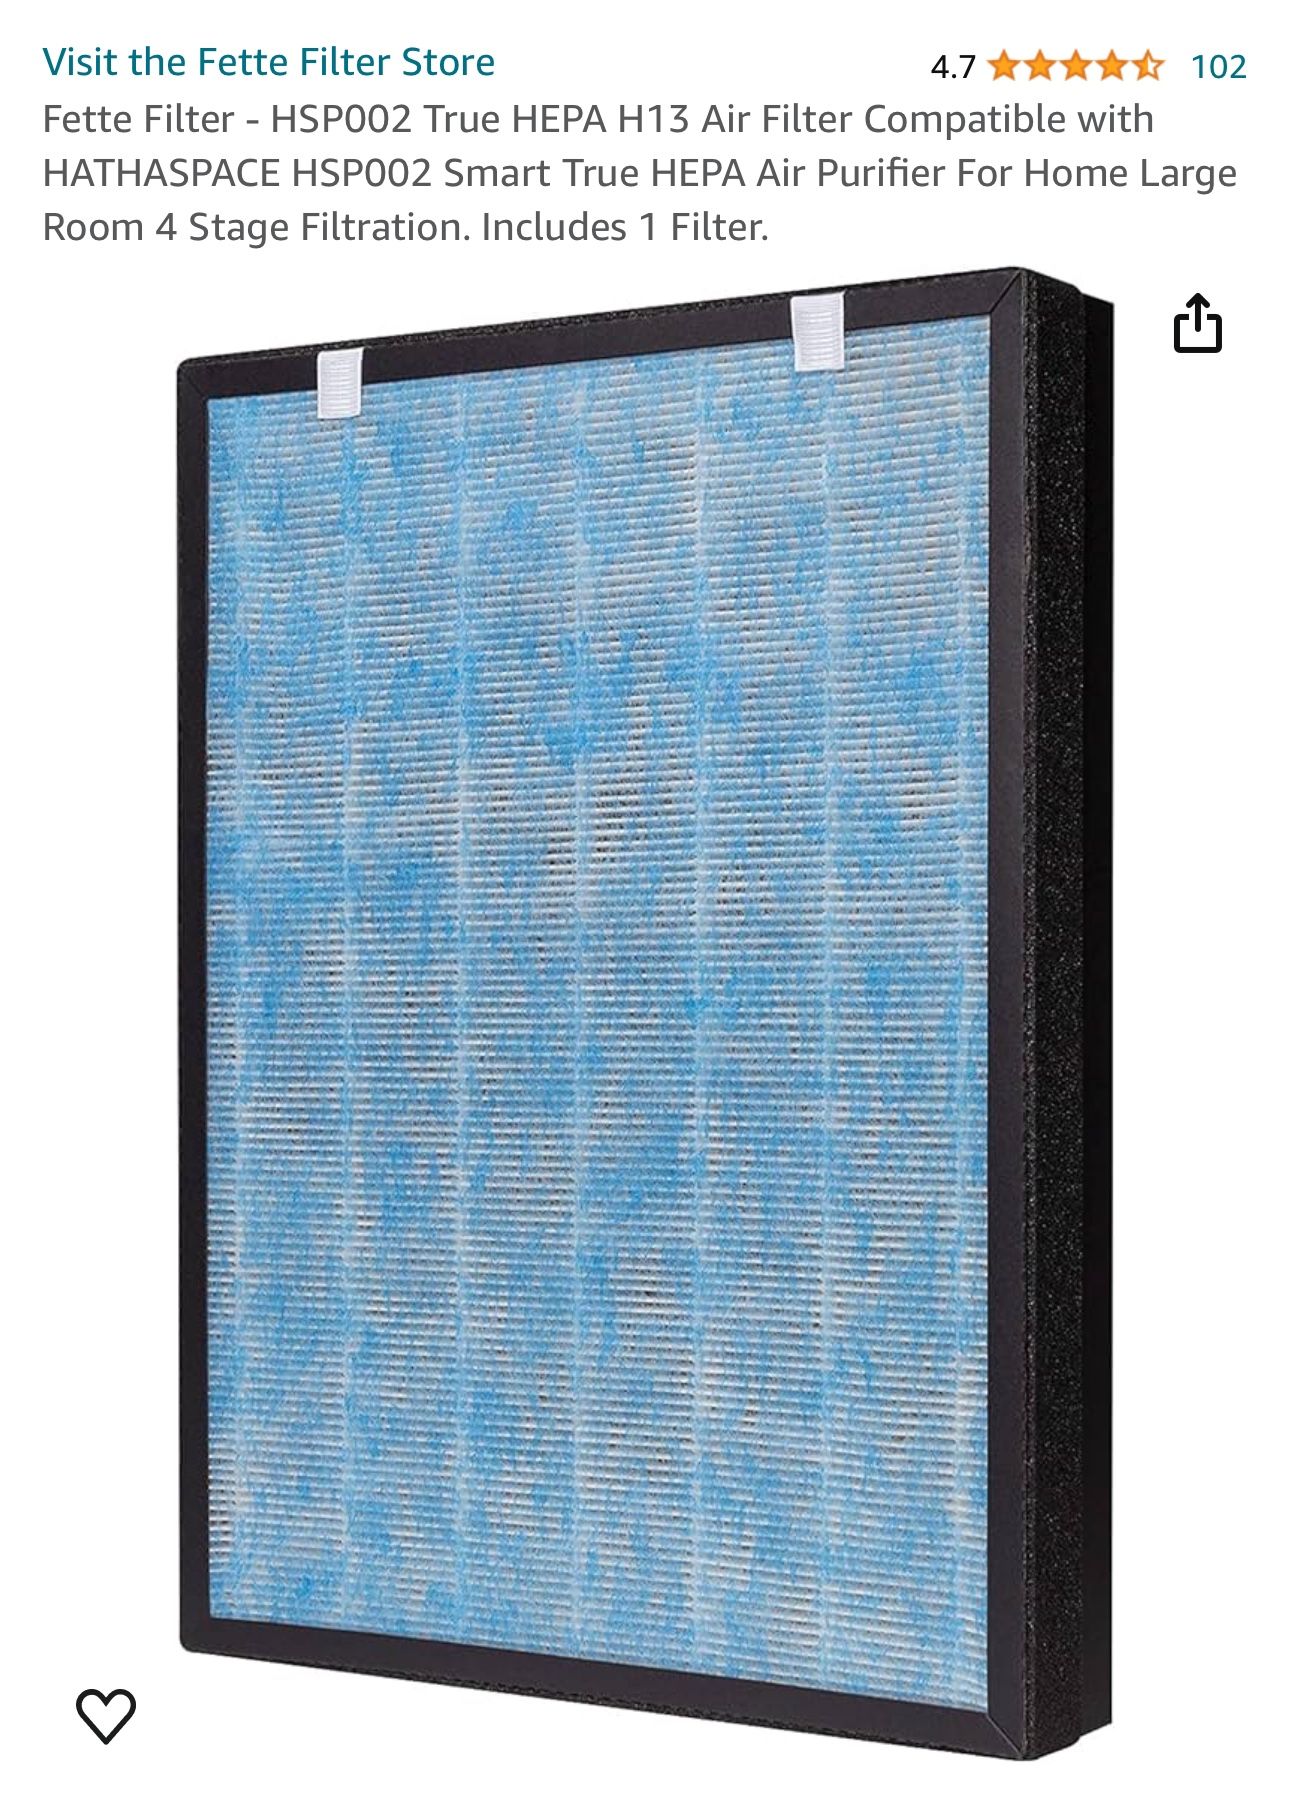 HSP002 True HEPA H13 Air Filter Compatible with HATHASPACE HSP002 Smart True HEPA Air Purifier For Home Large Room 4 Stage Filtration